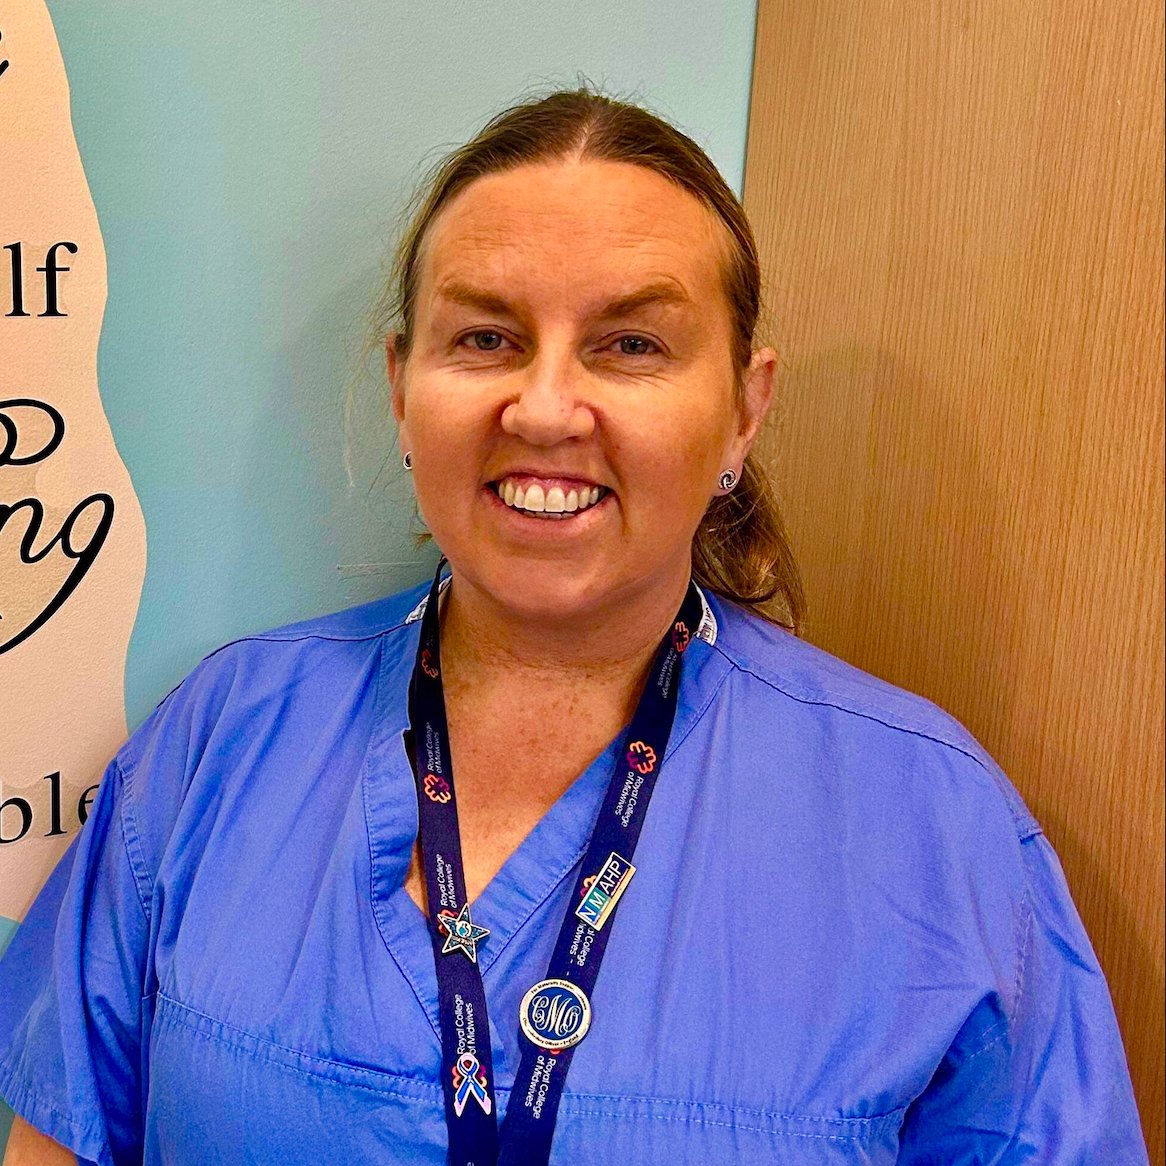 Racheal is a Maternity Support Worker, and when she lost her son Max by miscarriage, she wanted to use her experience to improve bereavement care at her hospital. Thank you Racheal for your incredible commitment to families and staff. 💙 #MaternitySupportWorkersDay